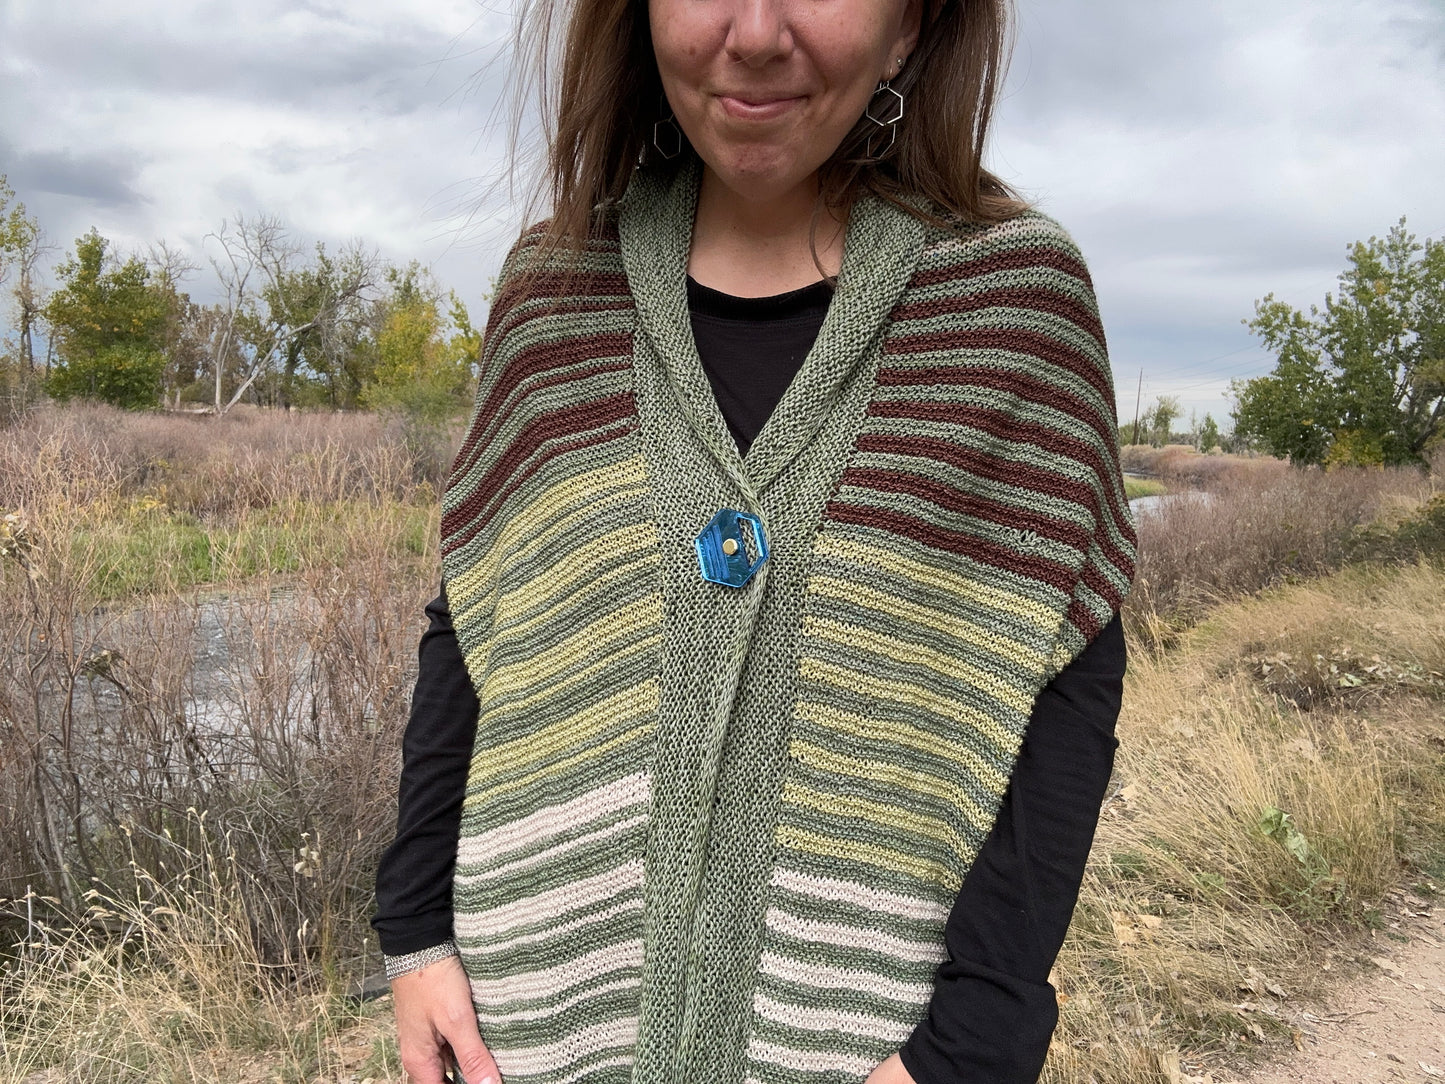 Shana wears the Multistate wrap around her shoulders in a green main color with a blue mirror Shawl Sandwich fastening it at the collar.